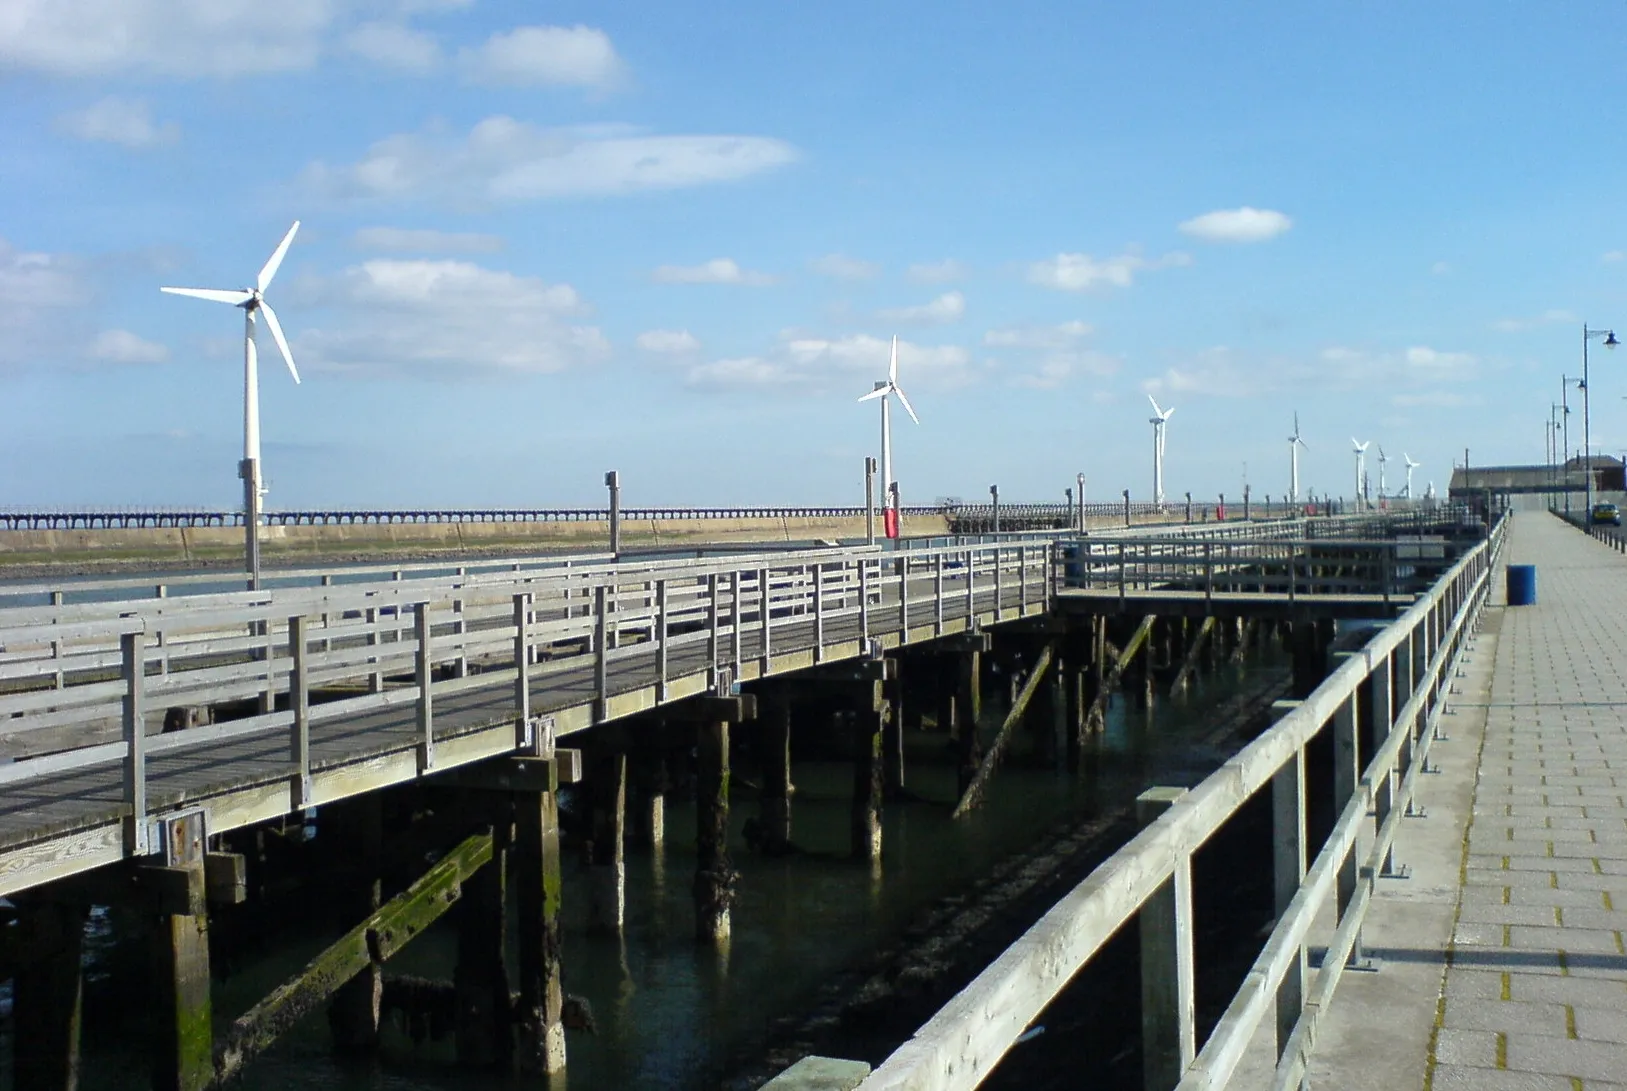 Photo showing: The Quayside and wind turbines at Blyth, Northumberland.